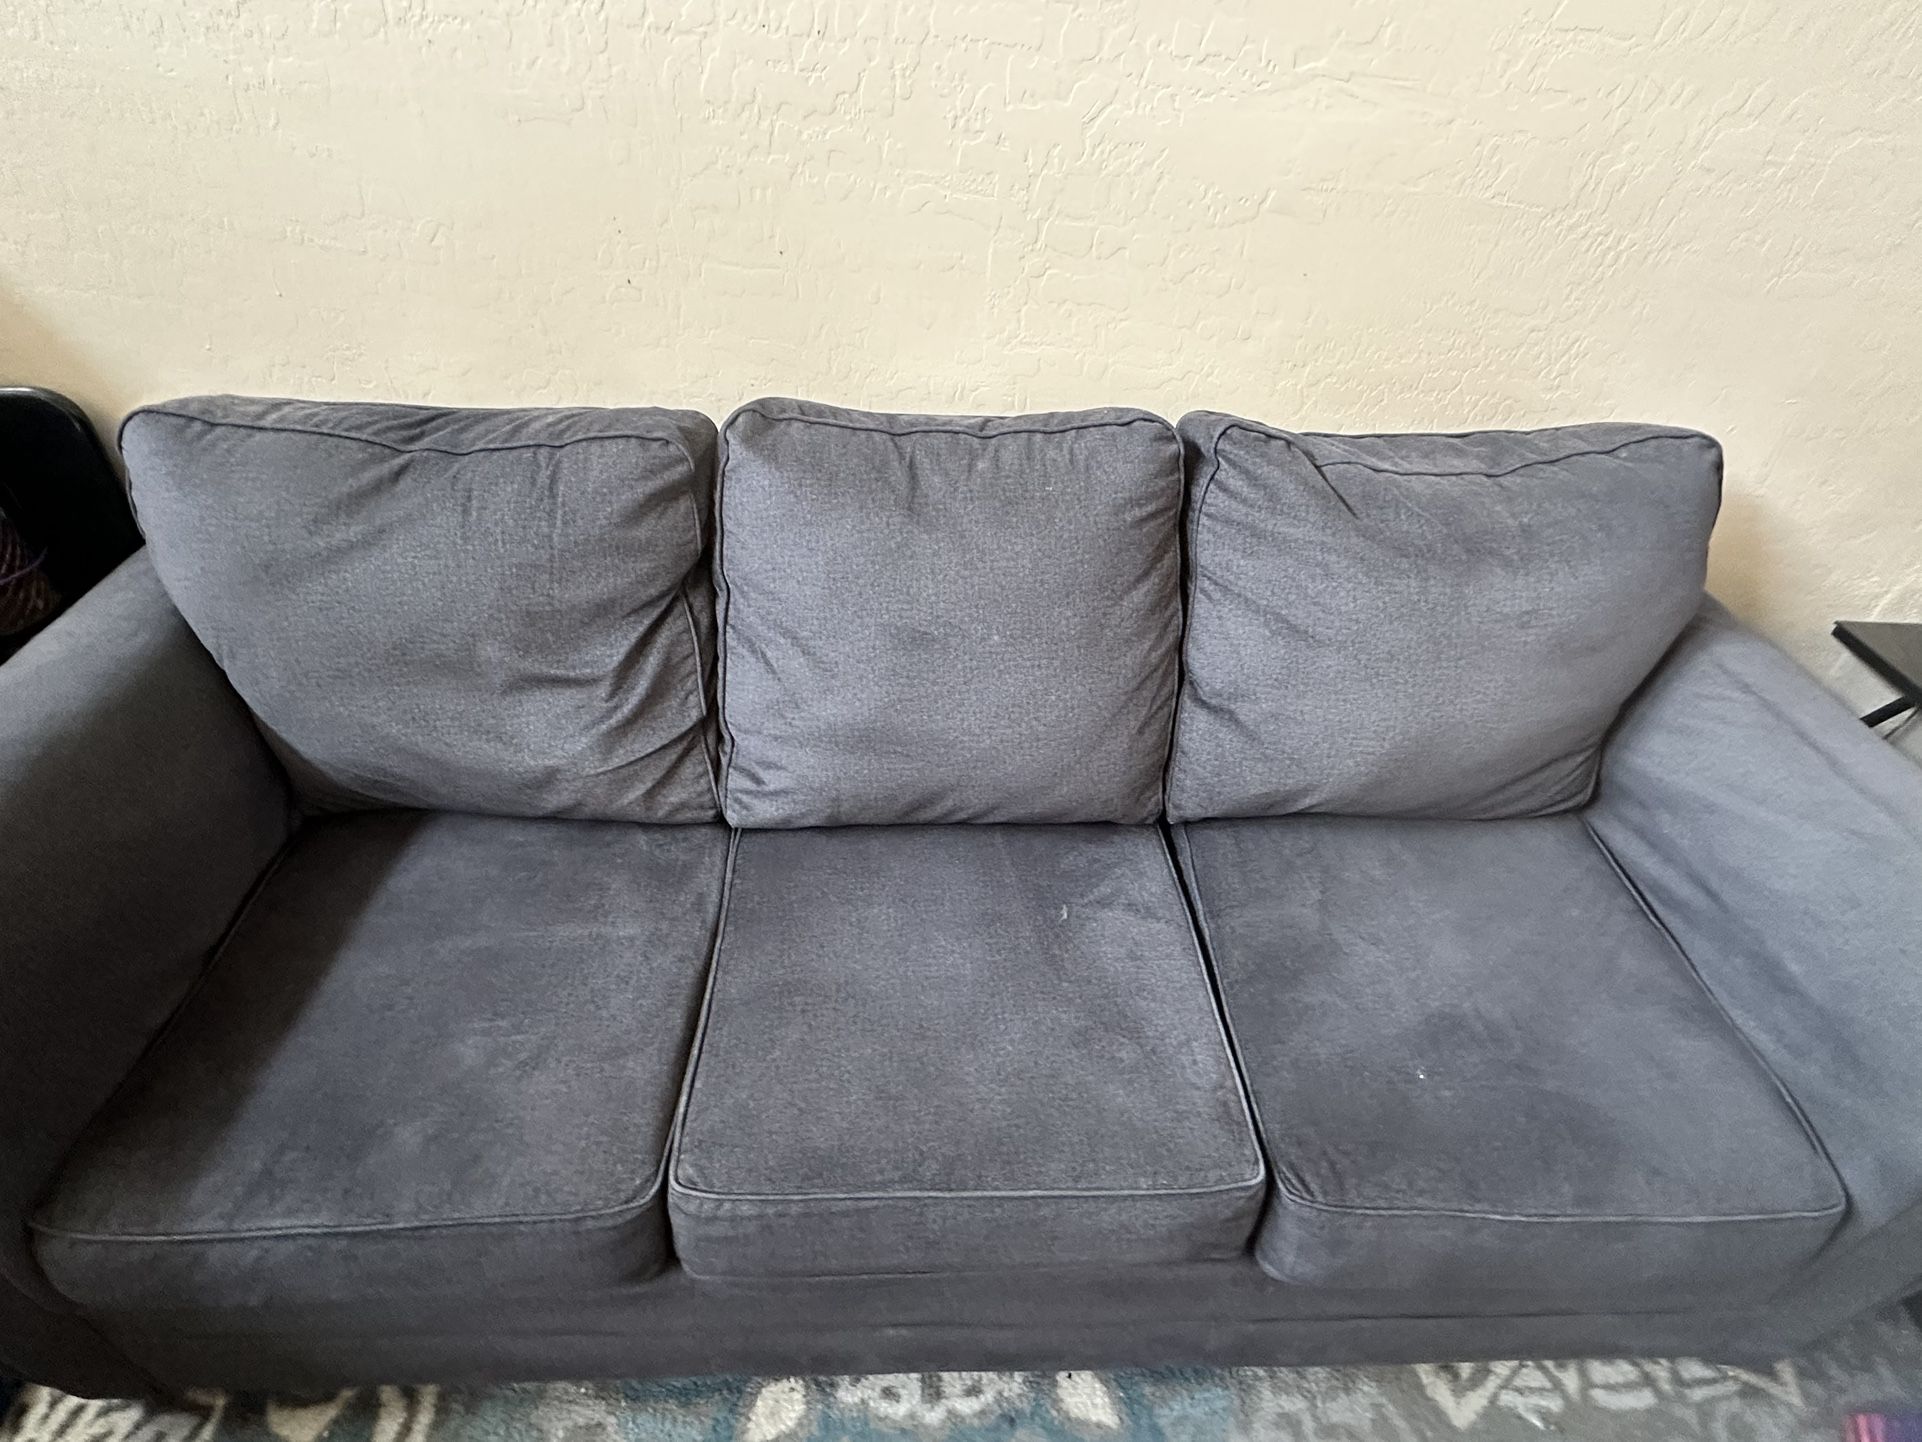 Couch & Loveseat Set